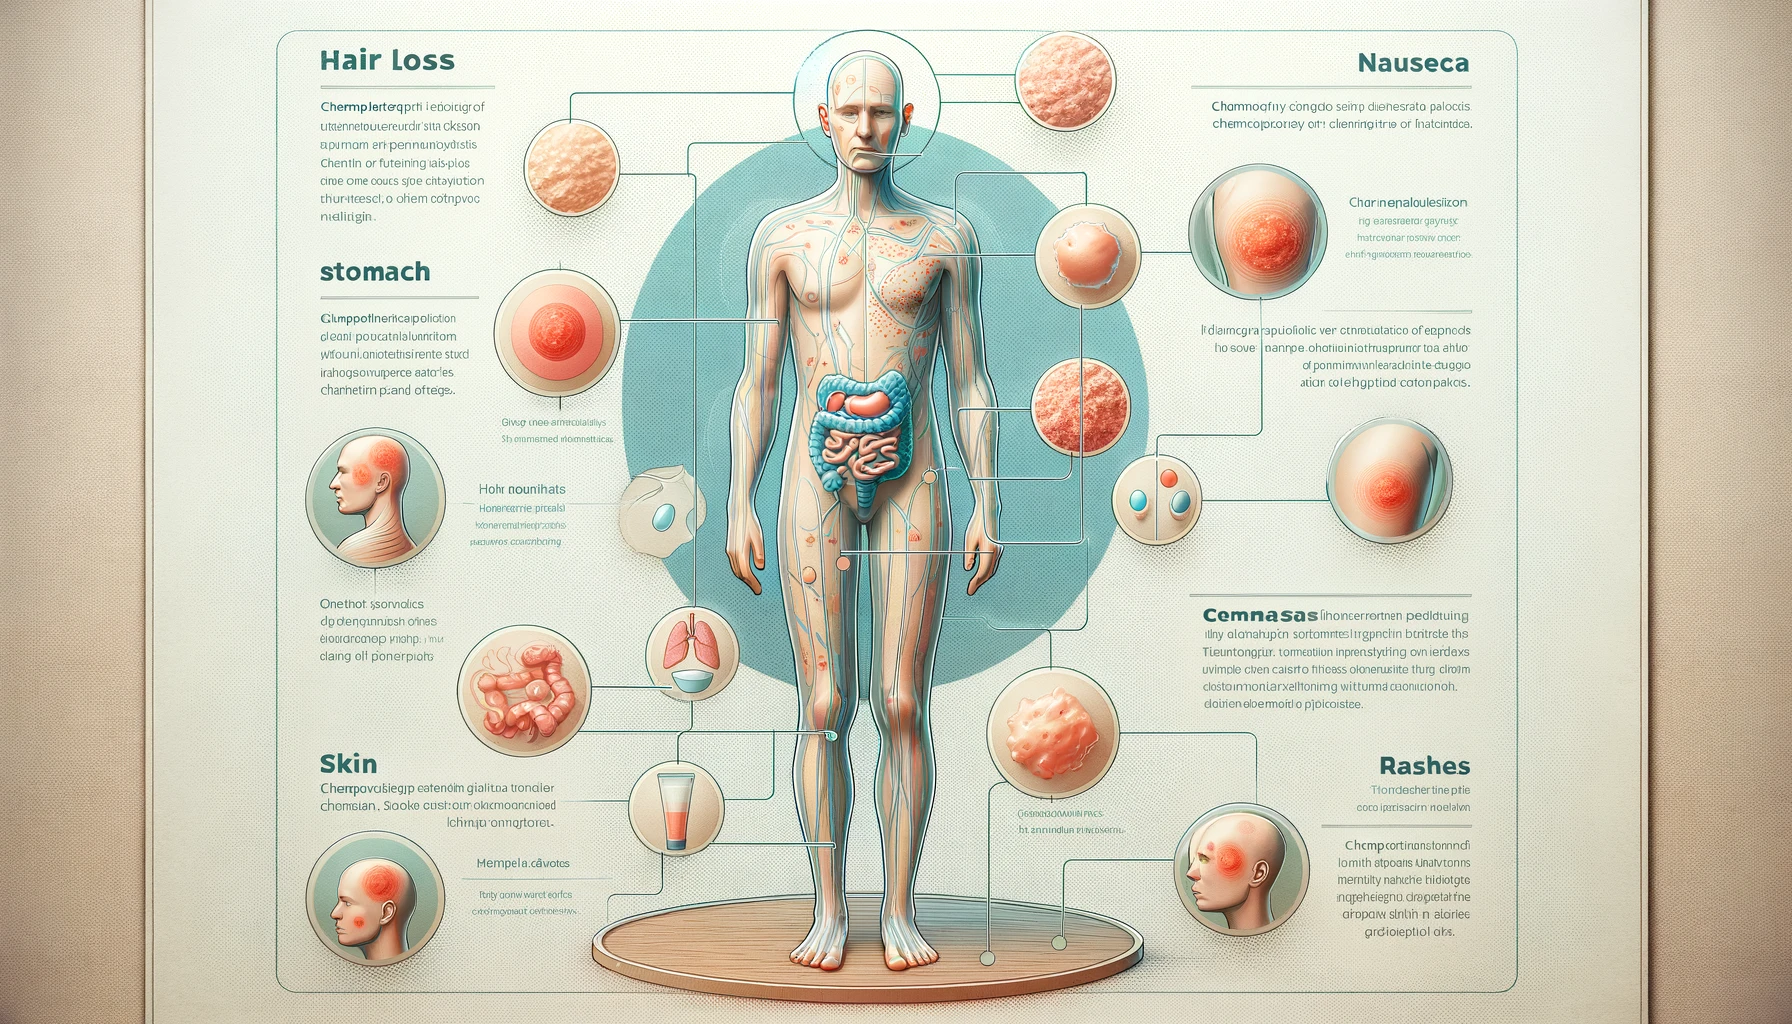 Side Effects of Chemotherapy on Body